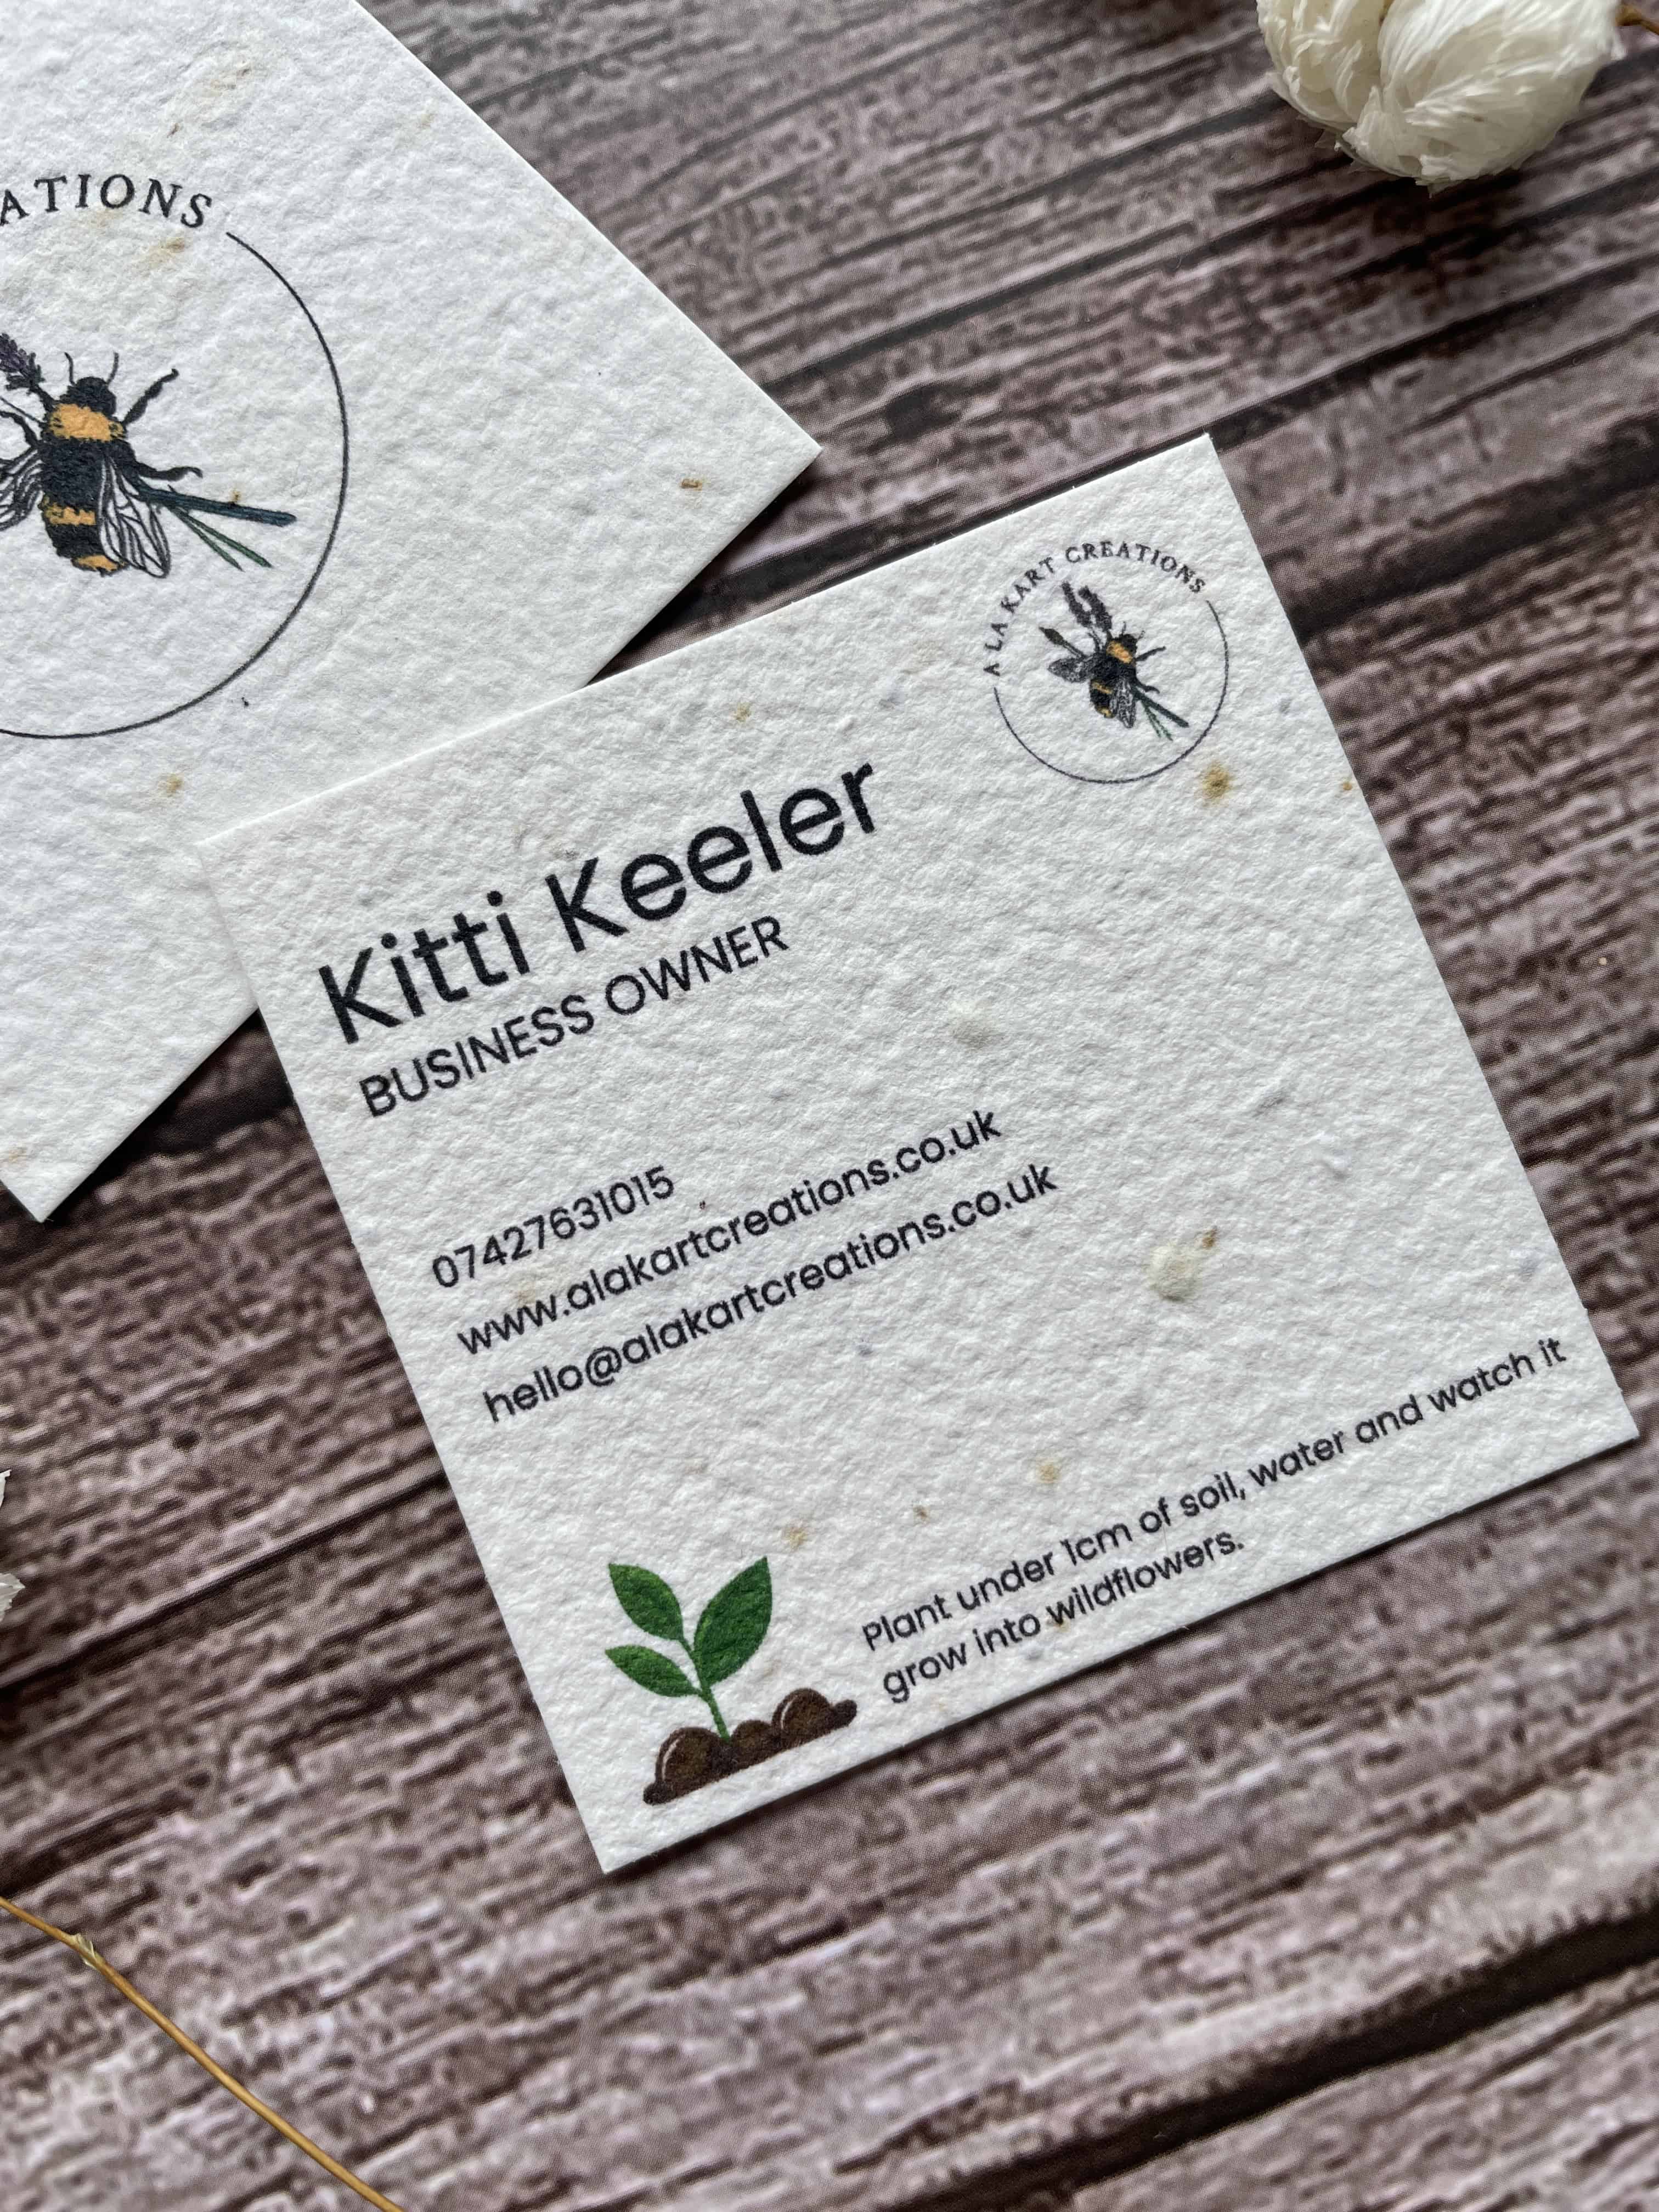 Plantable business cards square shaped with a sprout design